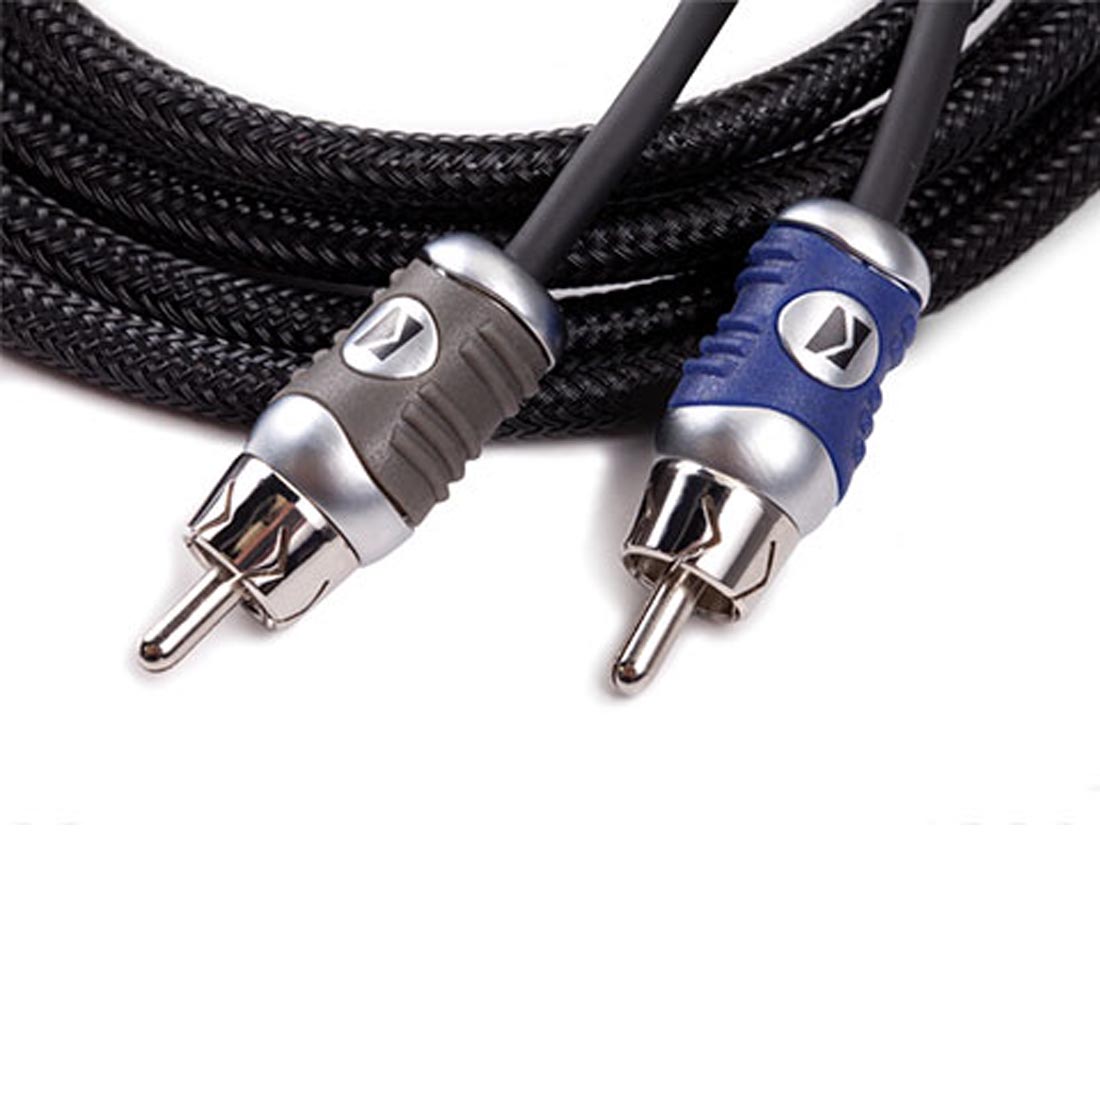 Kicker 46QI24 Q-Series Interconnect, 2-Channel RCA Signal Cable - 4 Meters